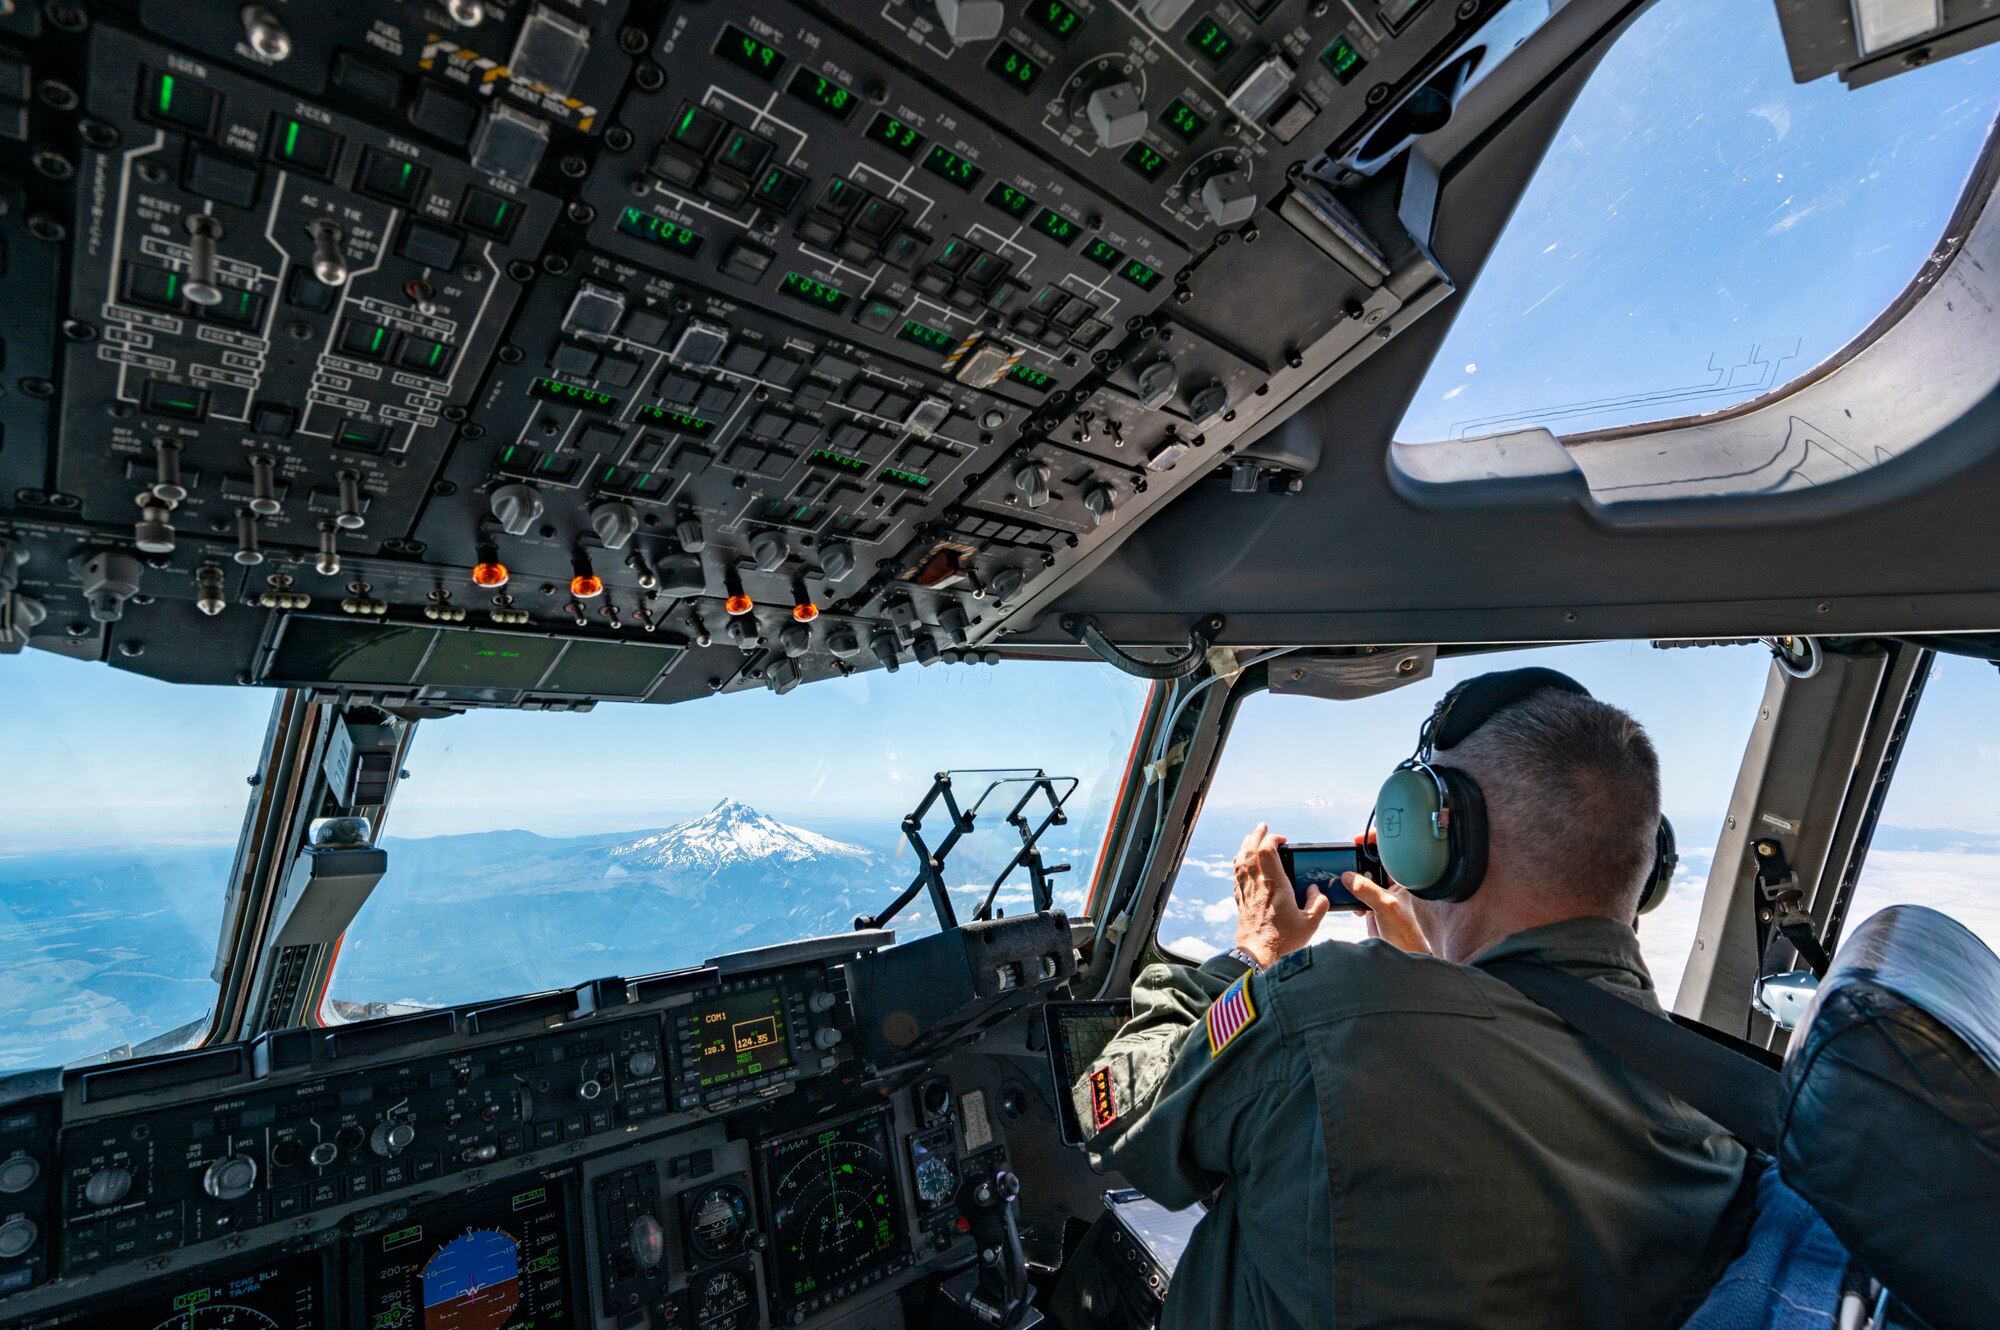 An Airman takes a photo from the flight deck of a plane.